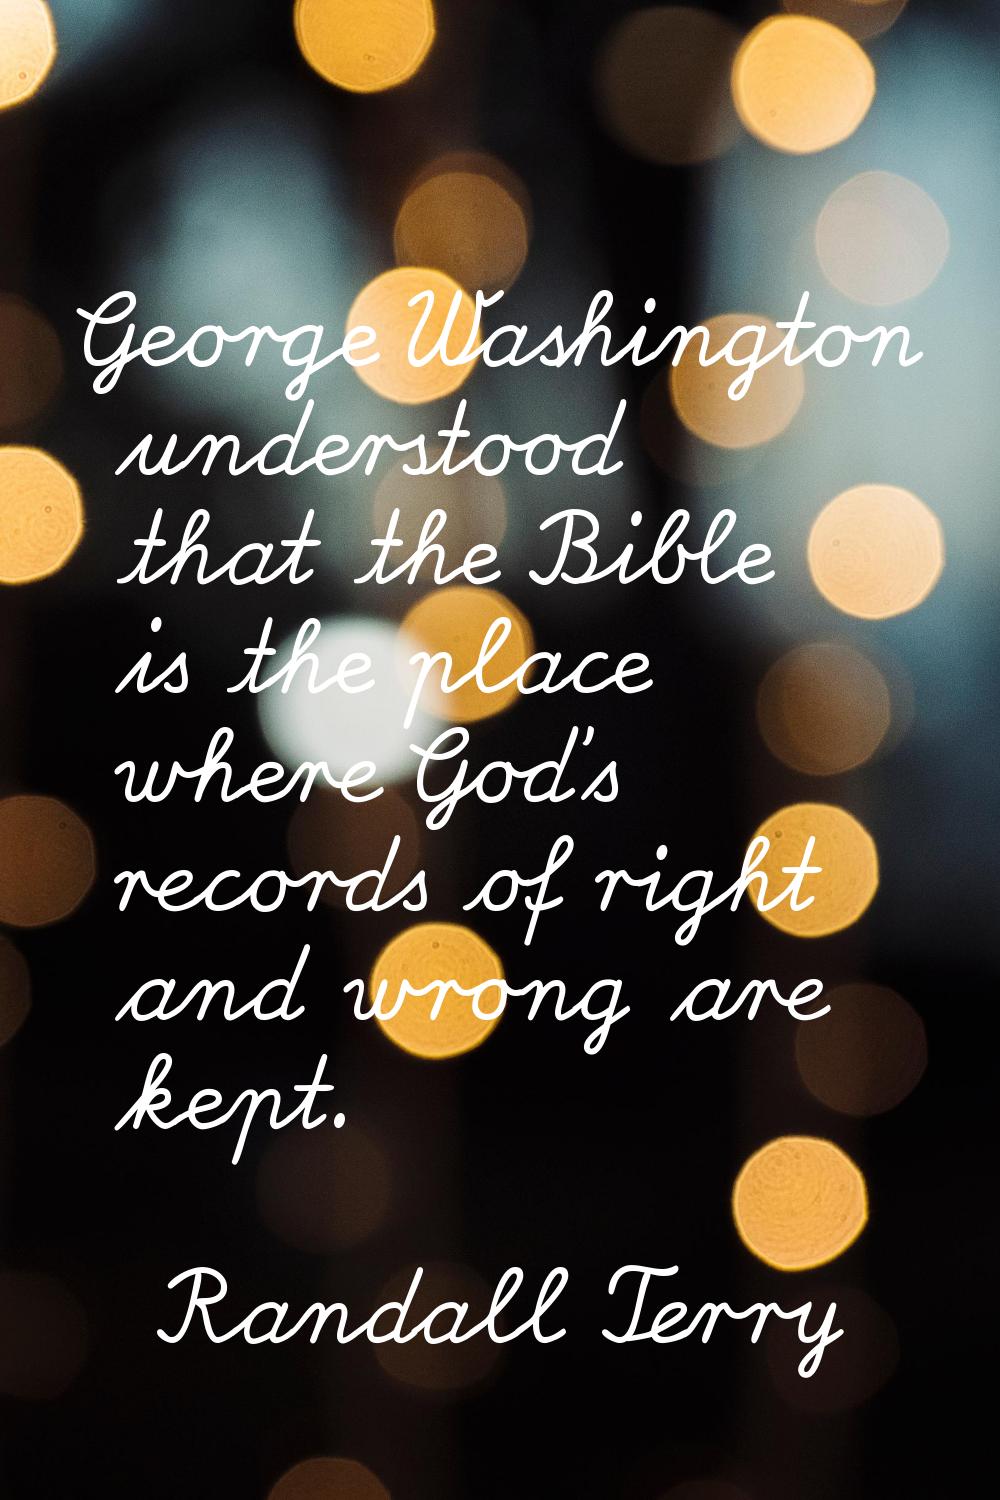 George Washington understood that the Bible is the place where God's records of right and wrong are